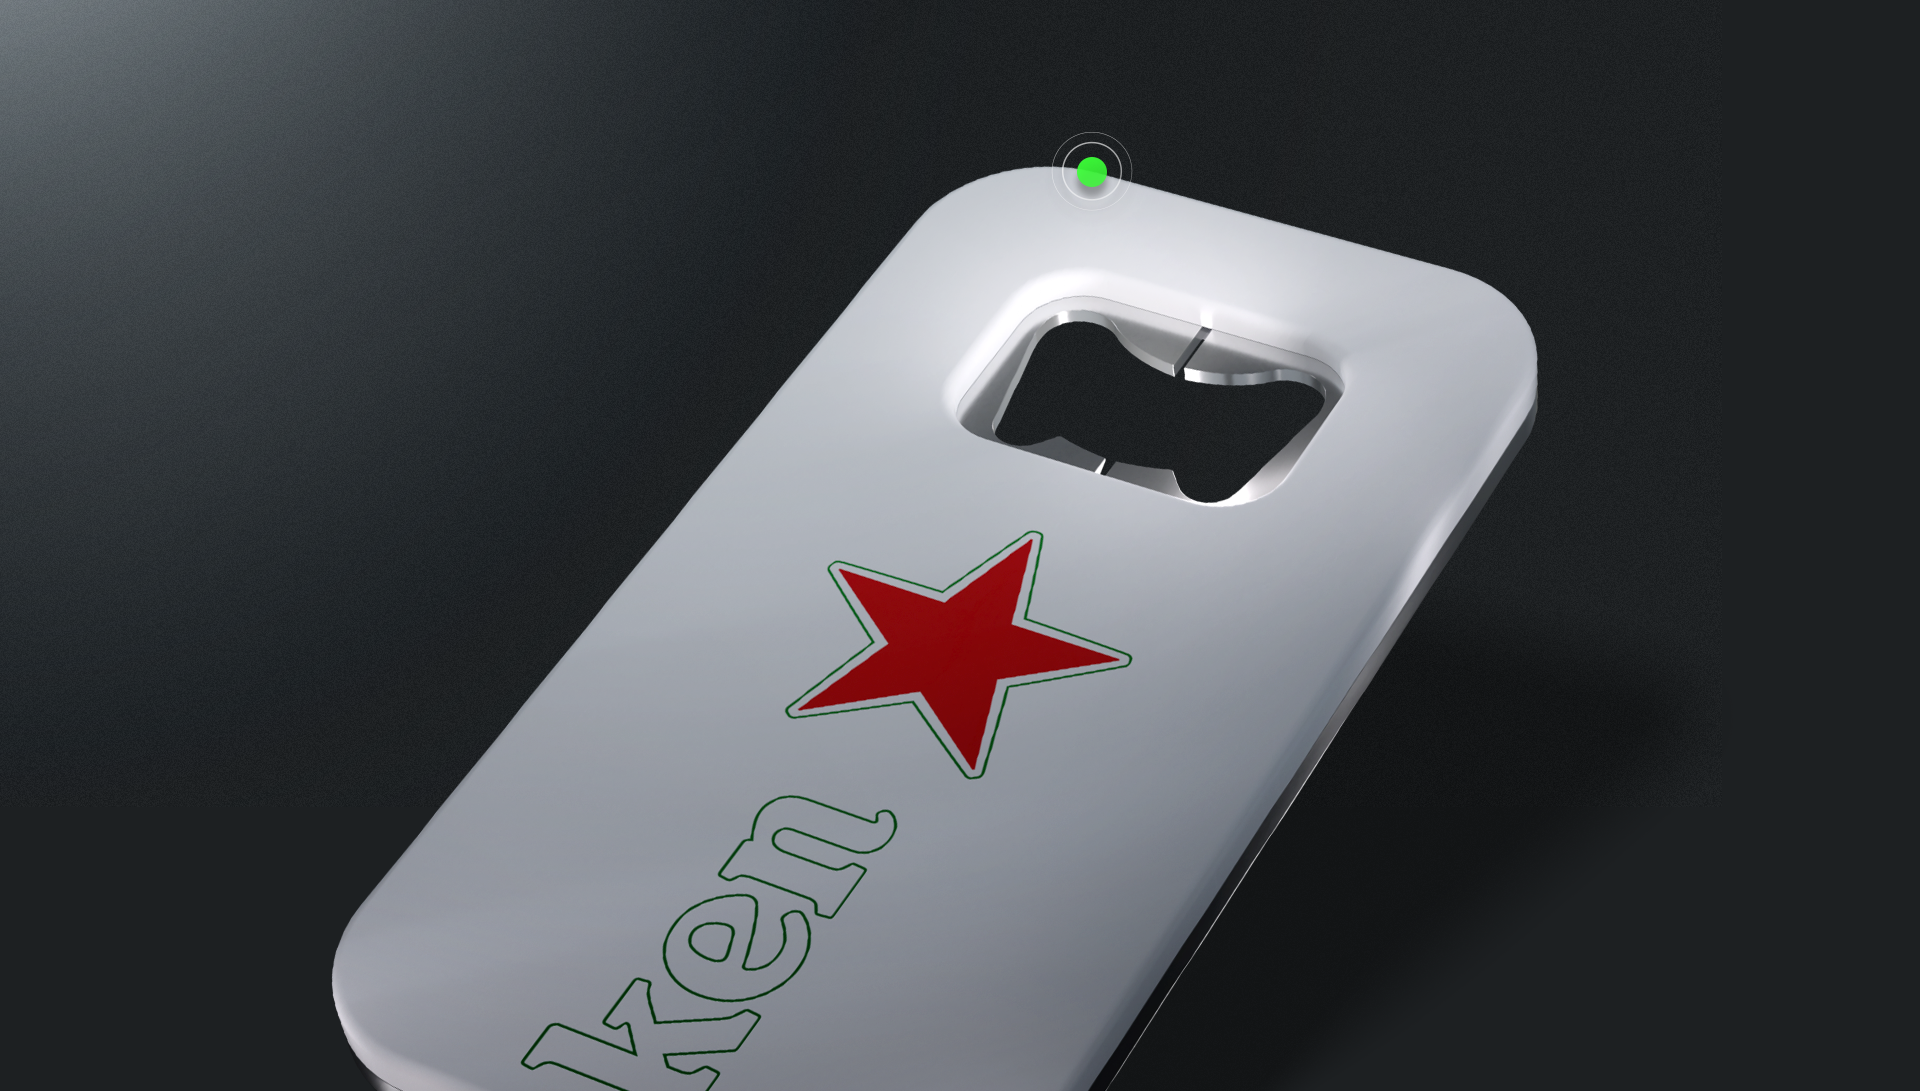 Heineken The Lager Company, Just Launched A Telephone